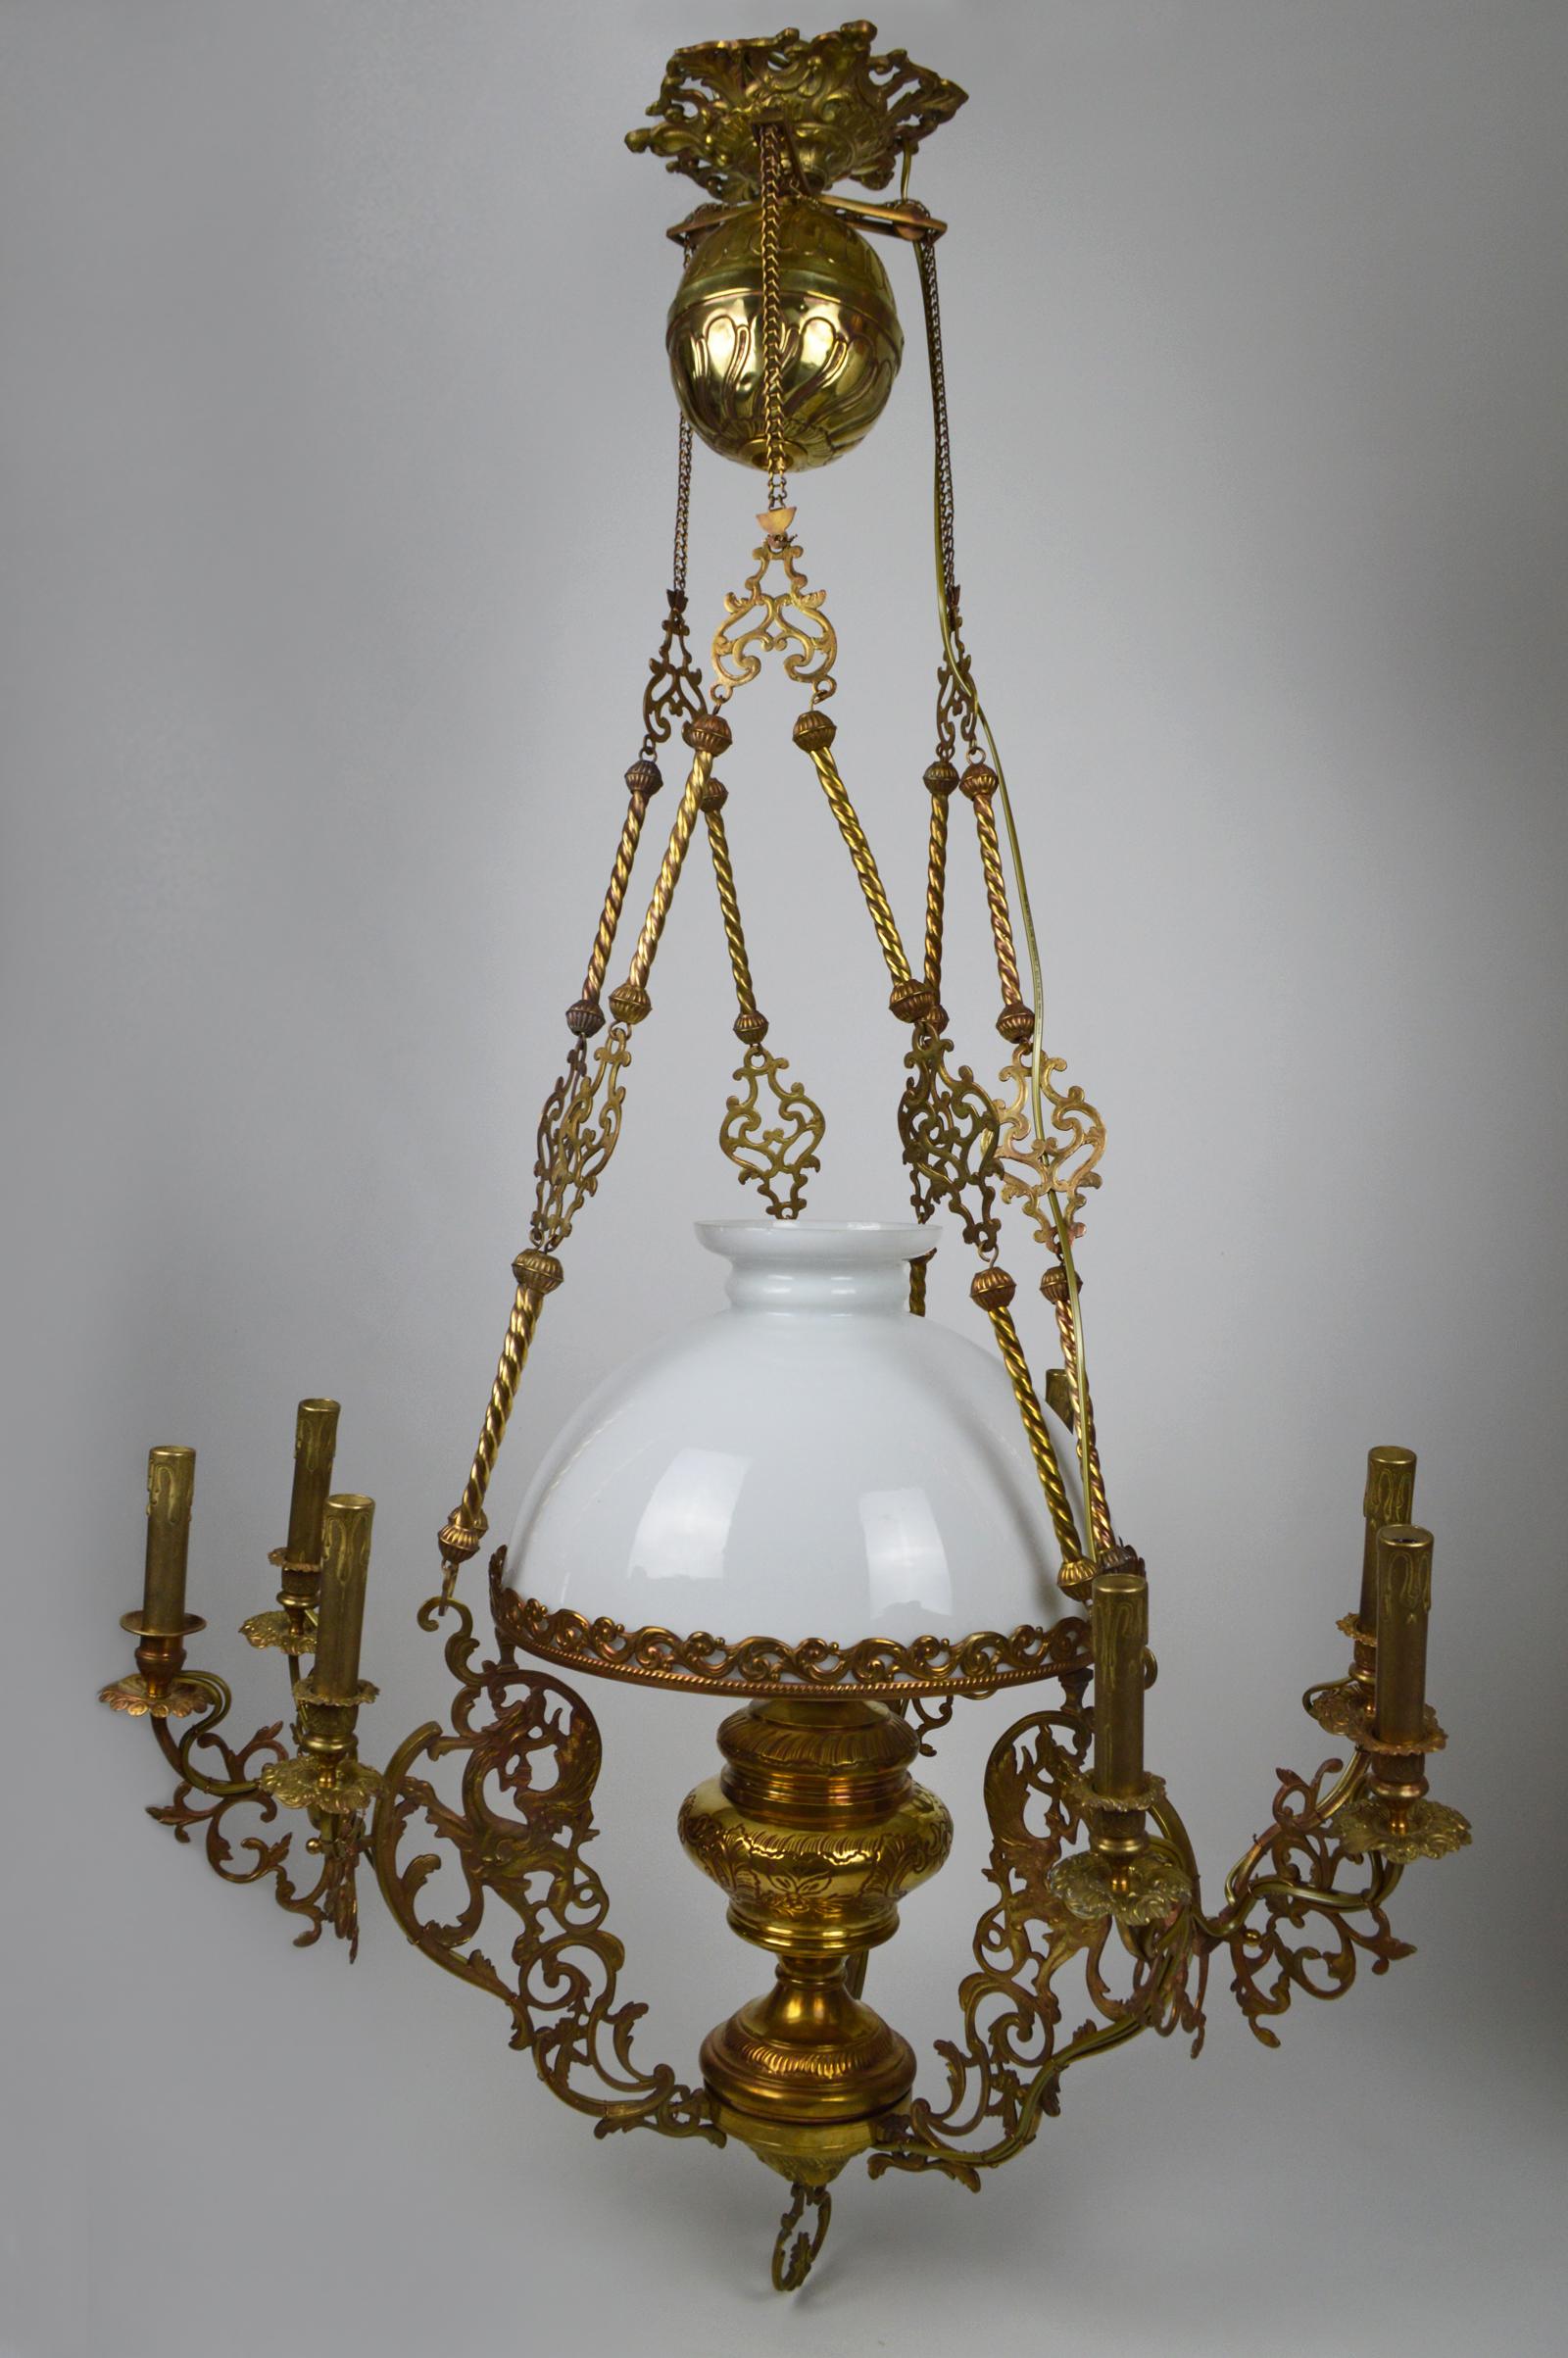 Large chandelier in bronze and brass. 
Three winged chimeras or dragons support the opaline lamp, late 19th century, was formerly used for candles and an oil lamp. 
Has been rewired, with ten lights: nine on fake candlesticks and one on the old